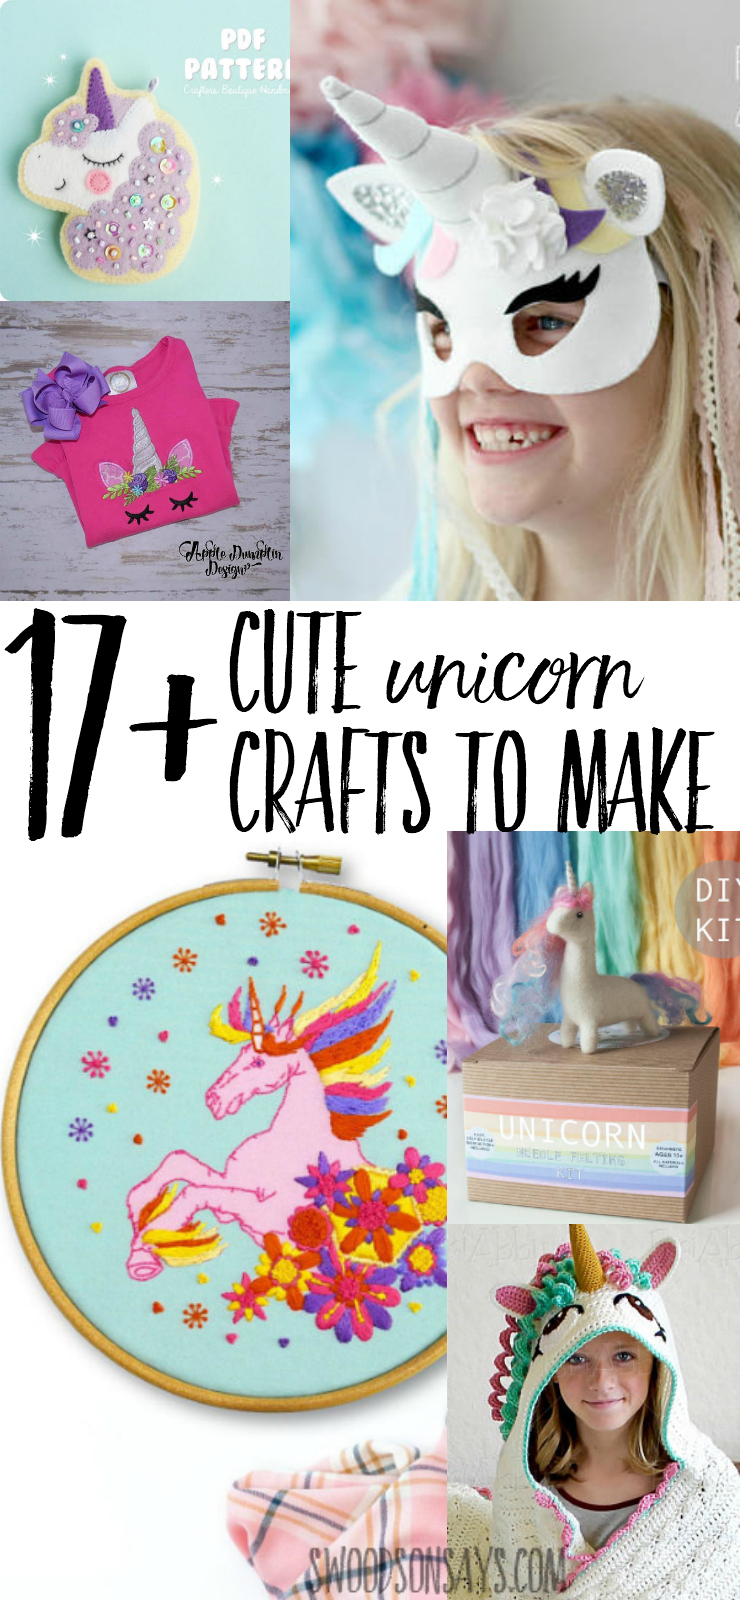 Check out these adorable unicorn craft patterns! Unicorn embroidery, unicorn sewing, unicorn crochet, unicorn applique, unicorns for every crafter and every kid! #unicorncraft #crafts #unicorn